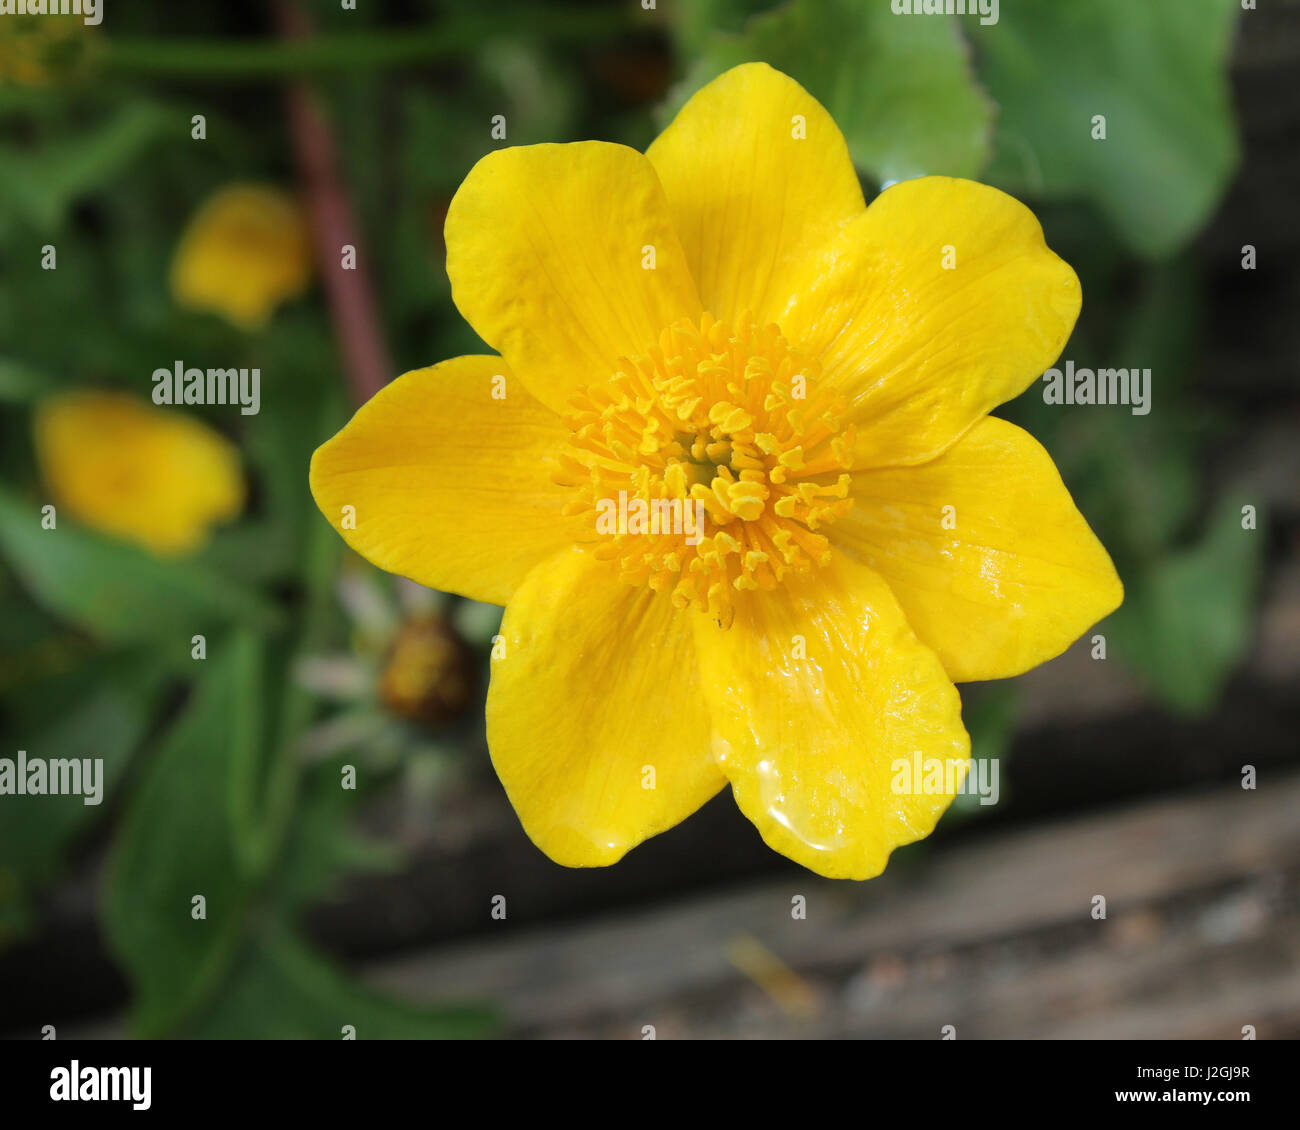 The beautiful bright yellow flower of the water loving plant Caltha palustris. Also known as Marsh Marigold or King Cup. Stock Photo